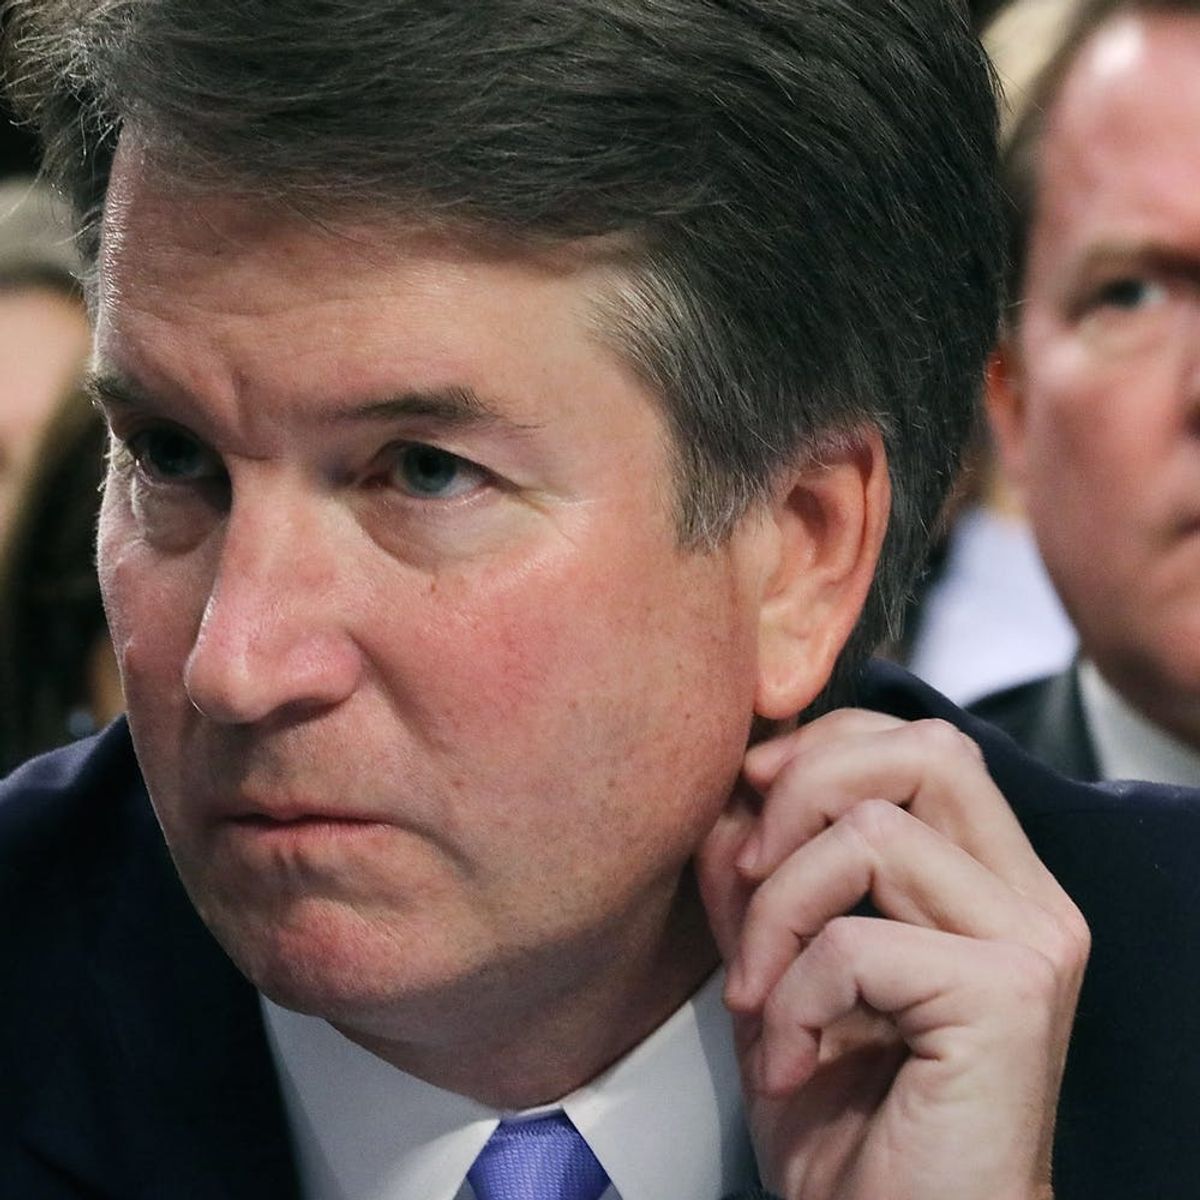 Brett Kavanaugh and the ‘Young White Male’ Defense